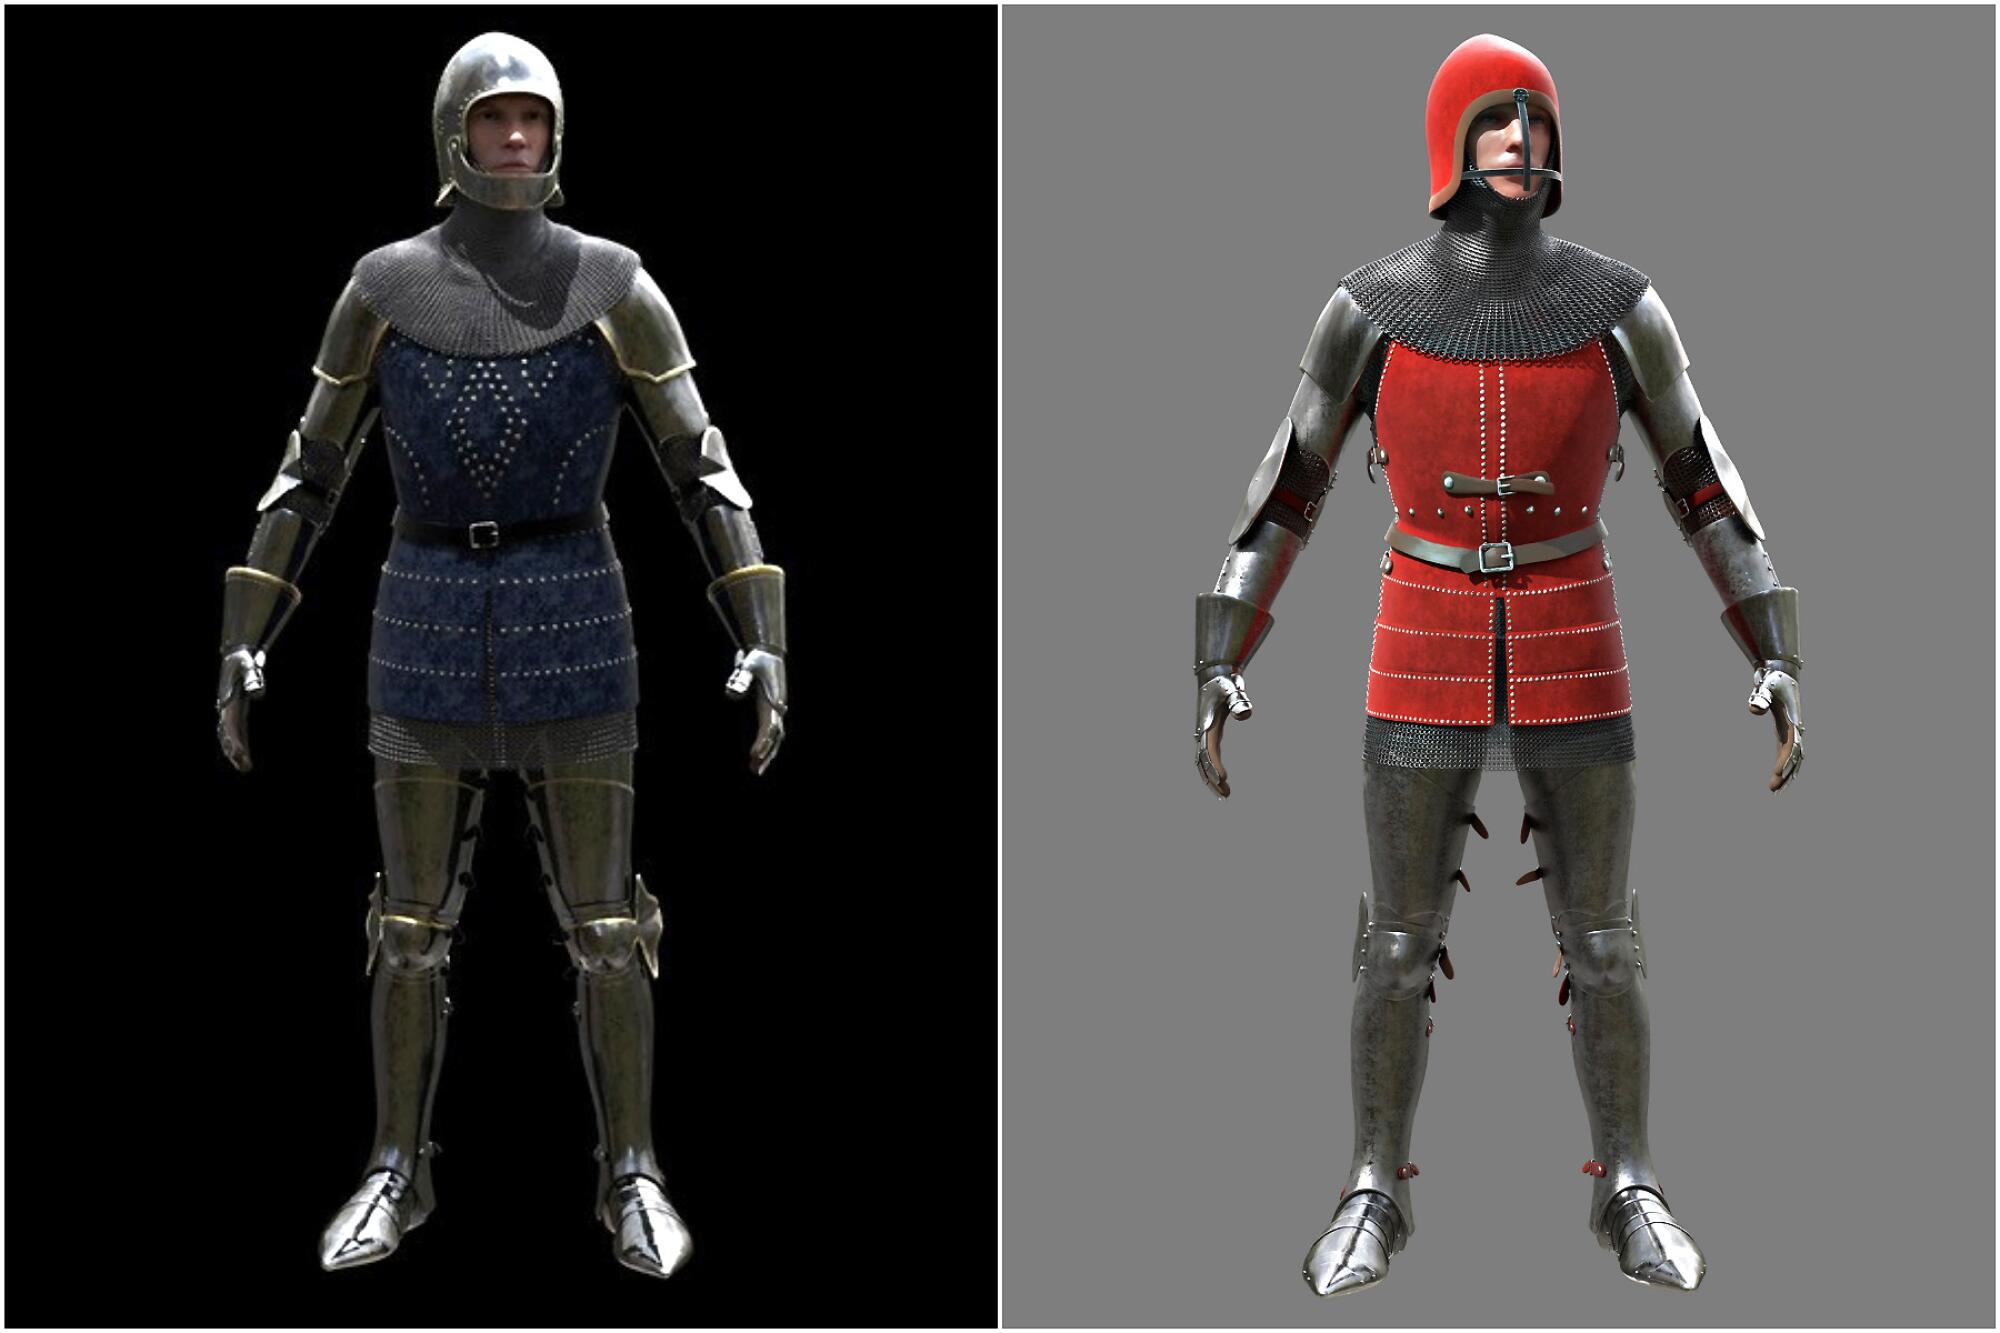 Digital concept designs for the armor in "The Last Duel."